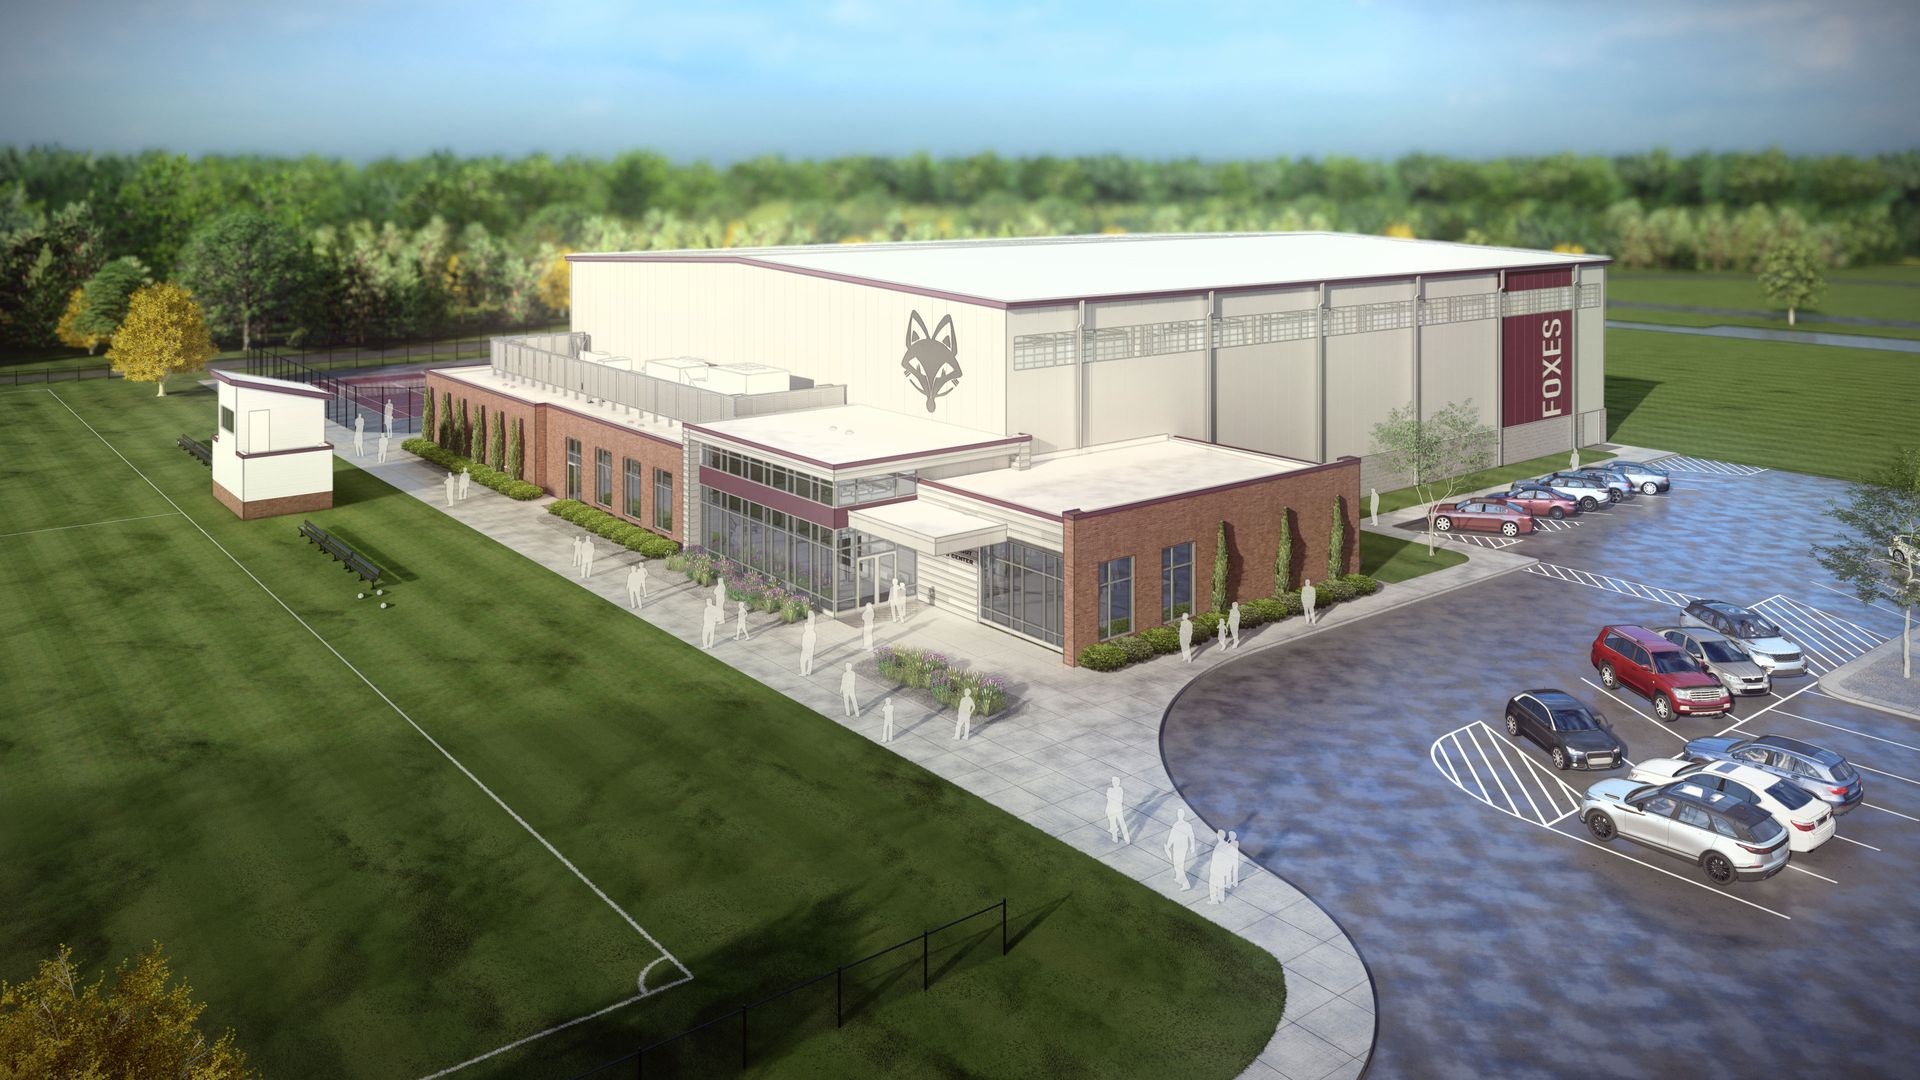 Rendering of the exterior of the Timothy Trout Sports Center